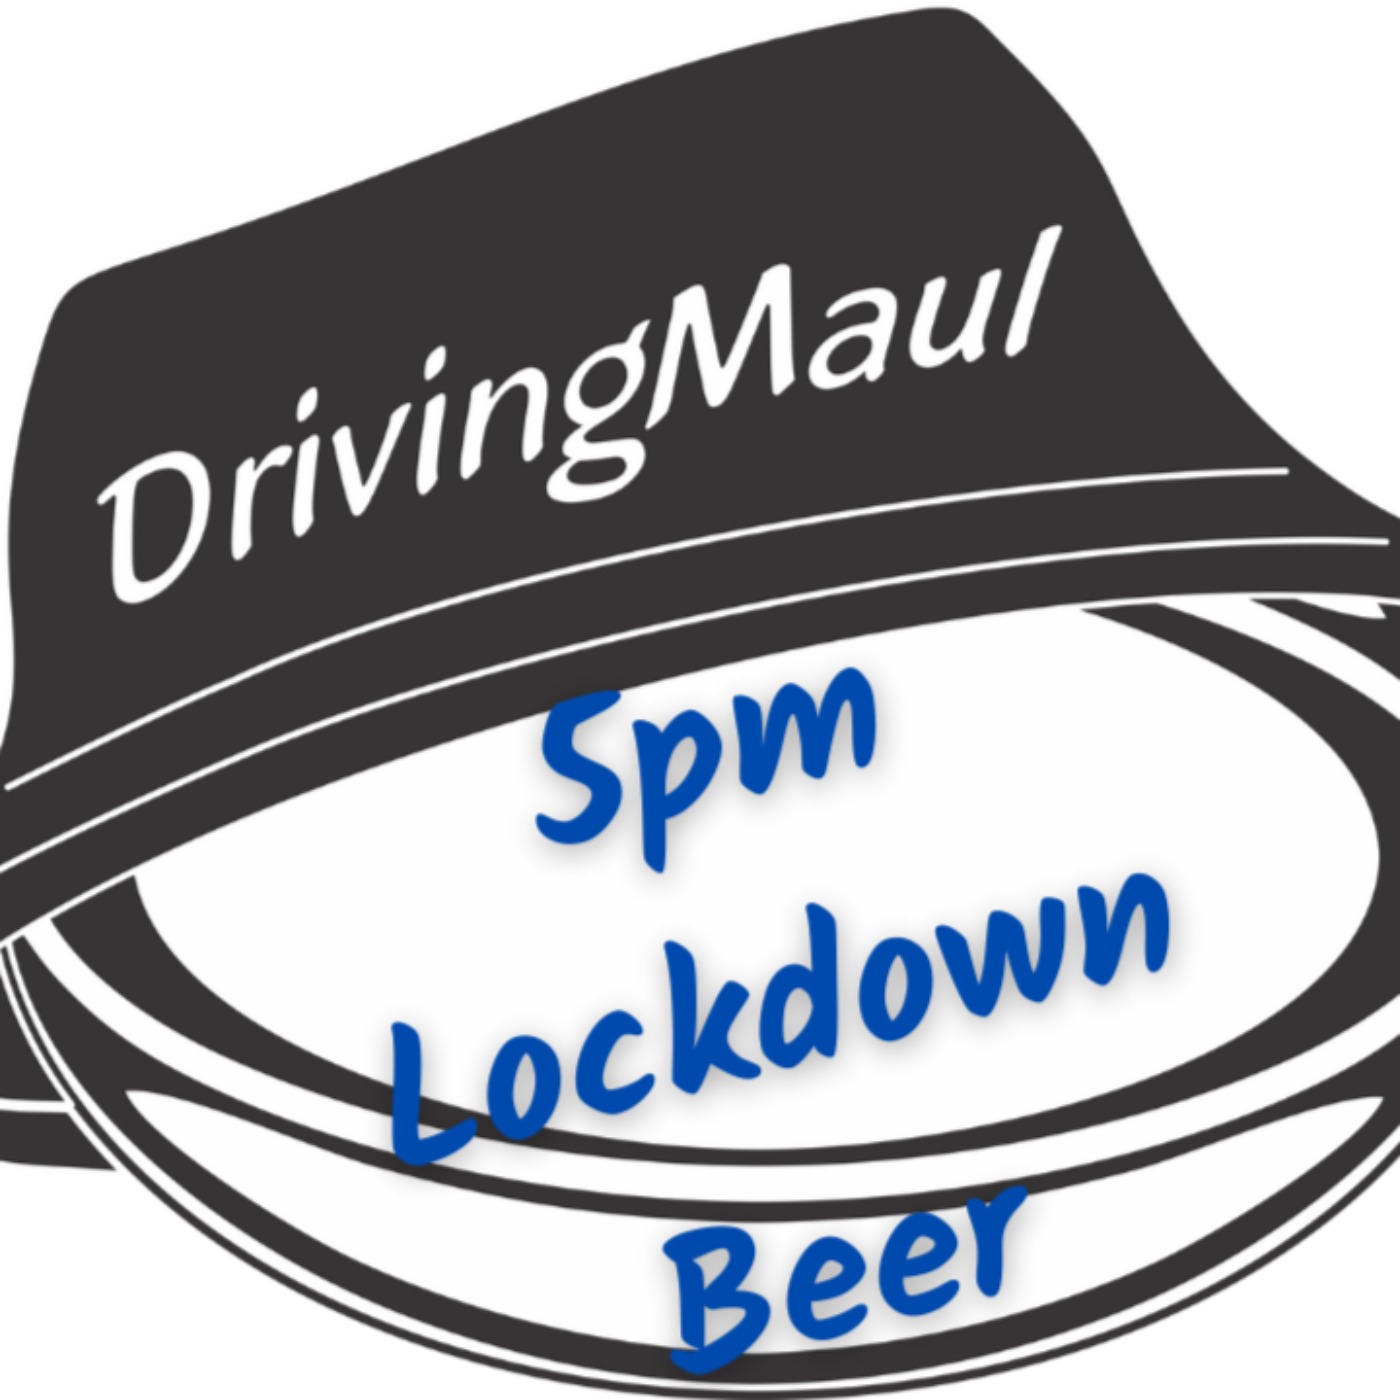 5pm Lockdown Beers & Rugby Chat - A Sad Day For Rugby